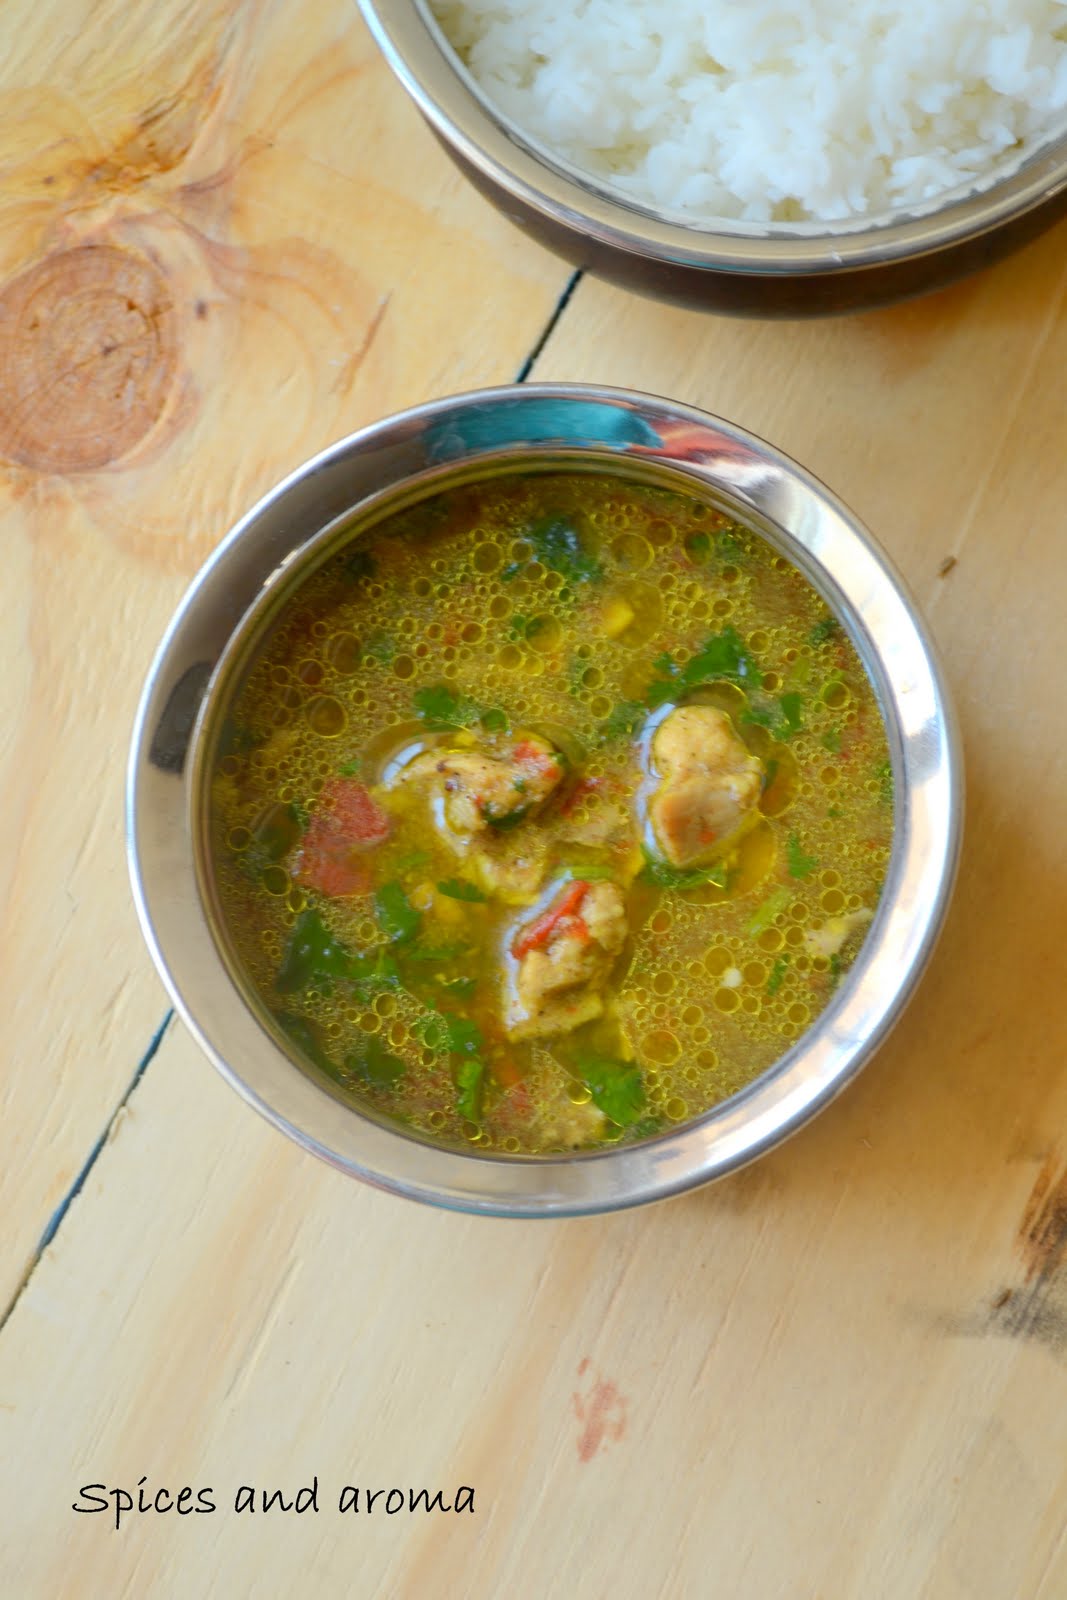 Spices and aroma: Chicken rasam - A South Indian soup